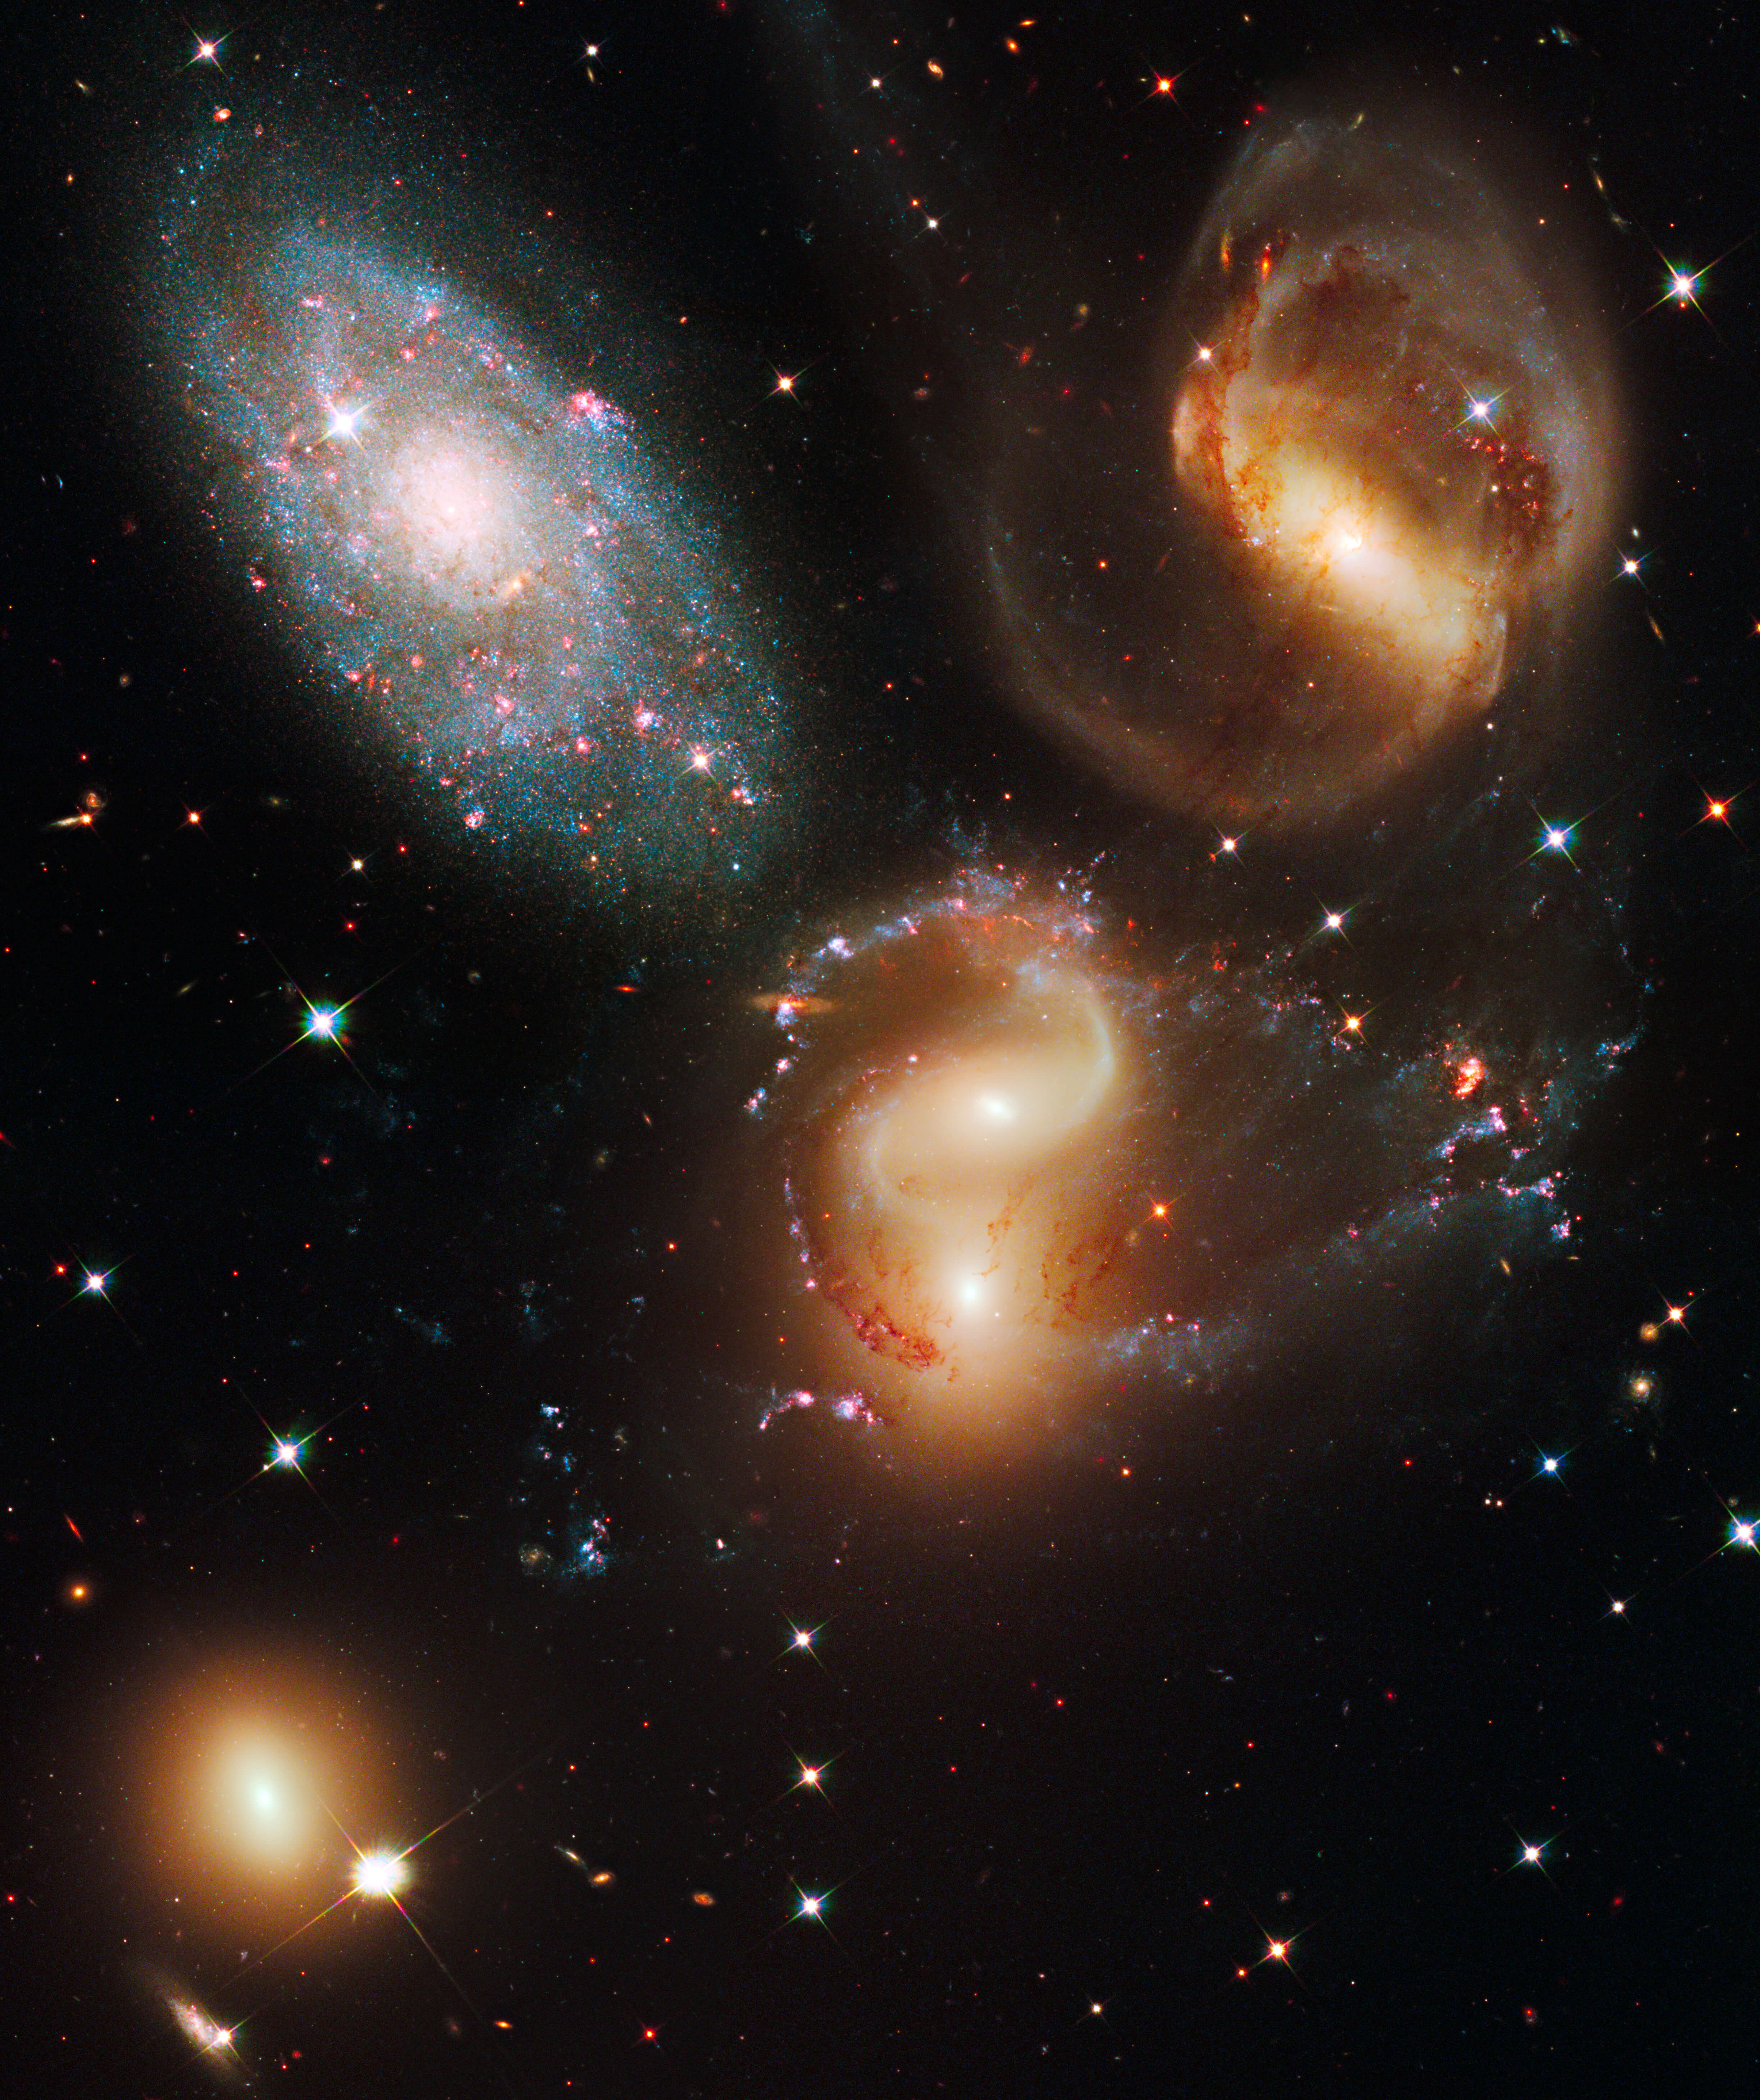 photographed by hubble telescope heaven